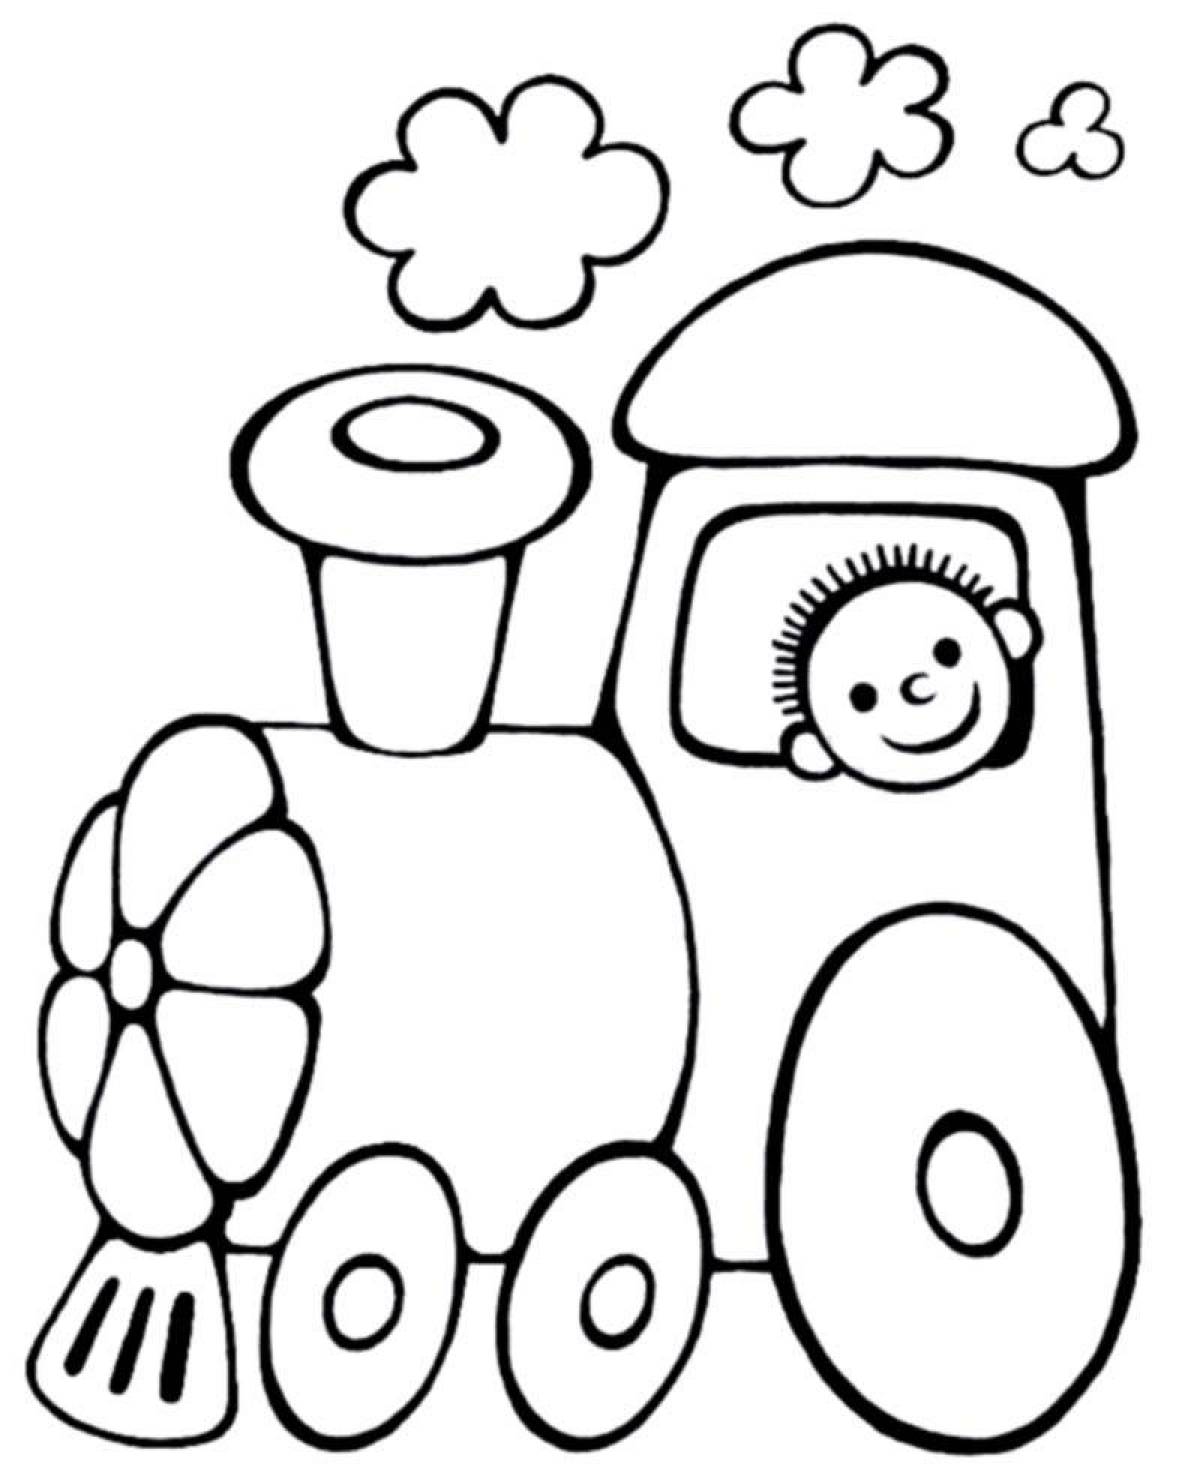 Cute coloring book for 2 year olds